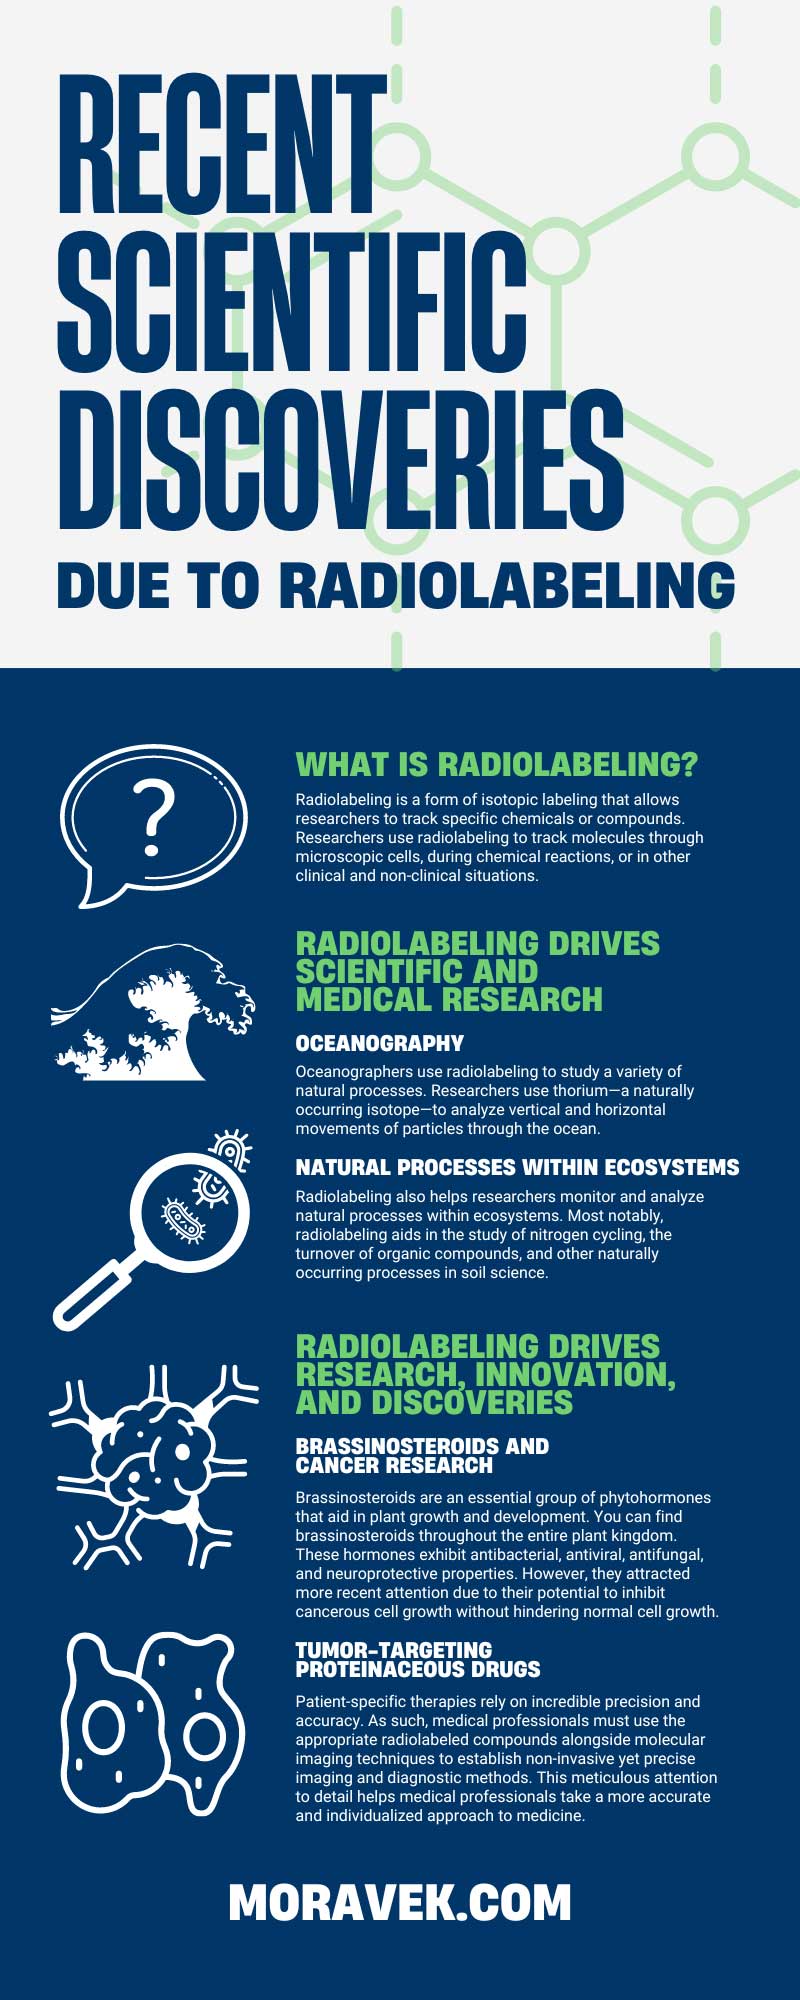 Recent Scientific Discoveries Due to Radiolabeling 